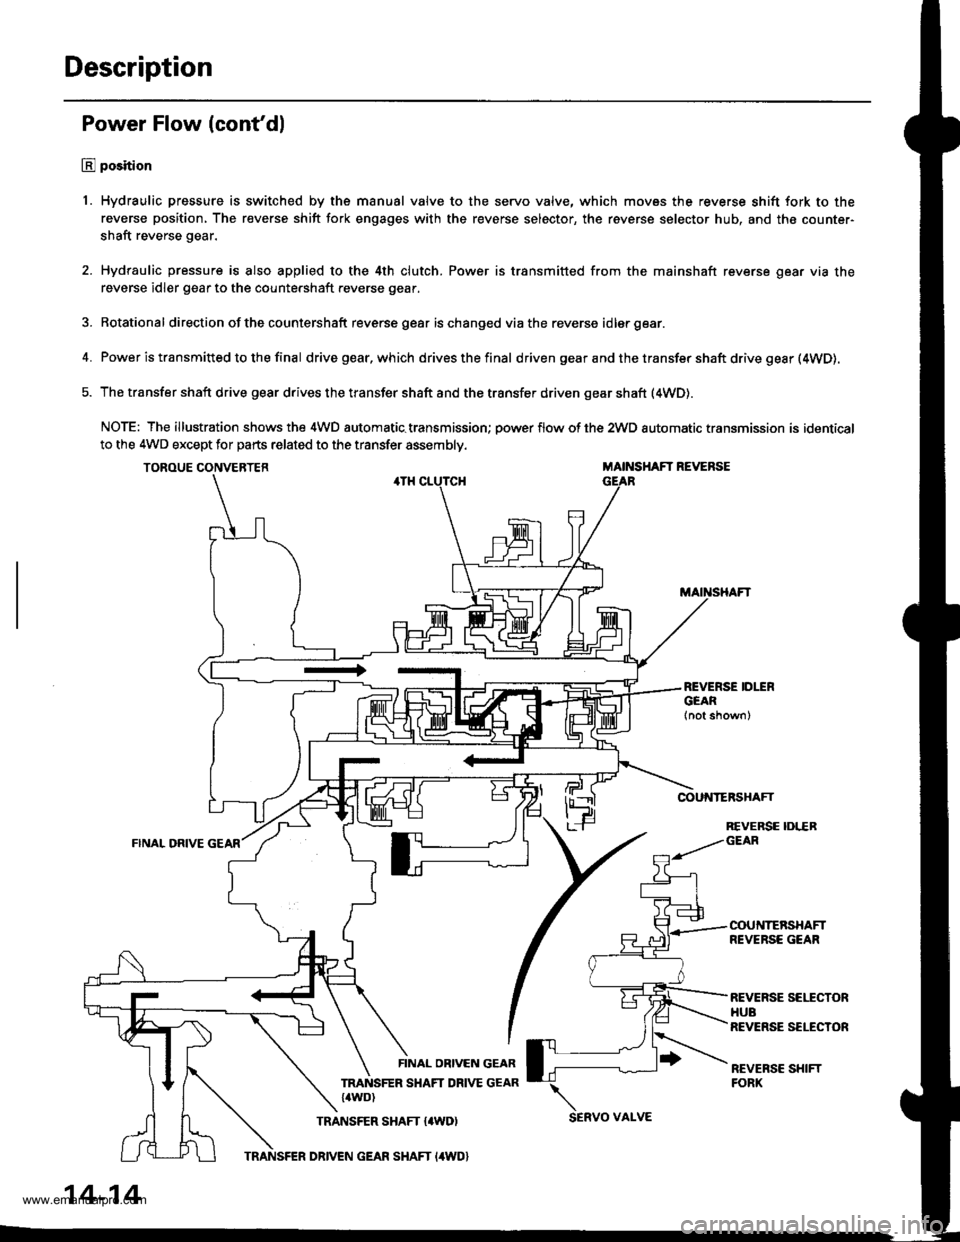 HONDA CR-V 1998 RD1-RD3 / 1.G Owners Guide 
Description
Power Flow (contdl
E position
1. Hydraulic pressure is switched by the manual valve to the servo valve, which movss the reverse shift fork to the
reverse position, The reverse shift fork